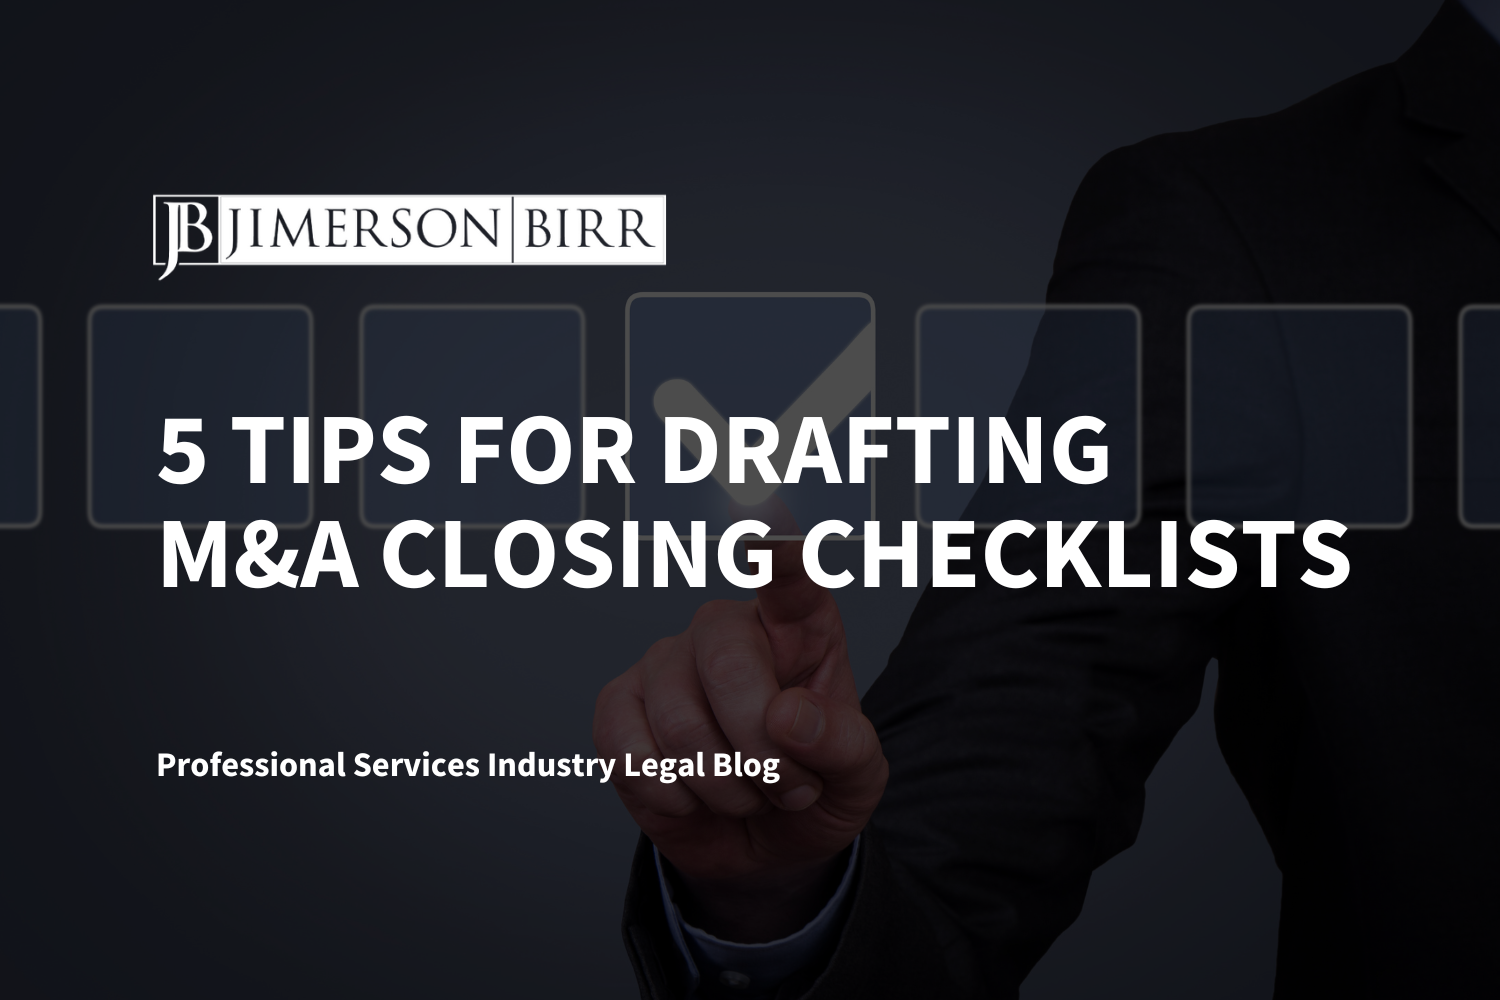 5 Tips for Drafting M&A Closing Checklists